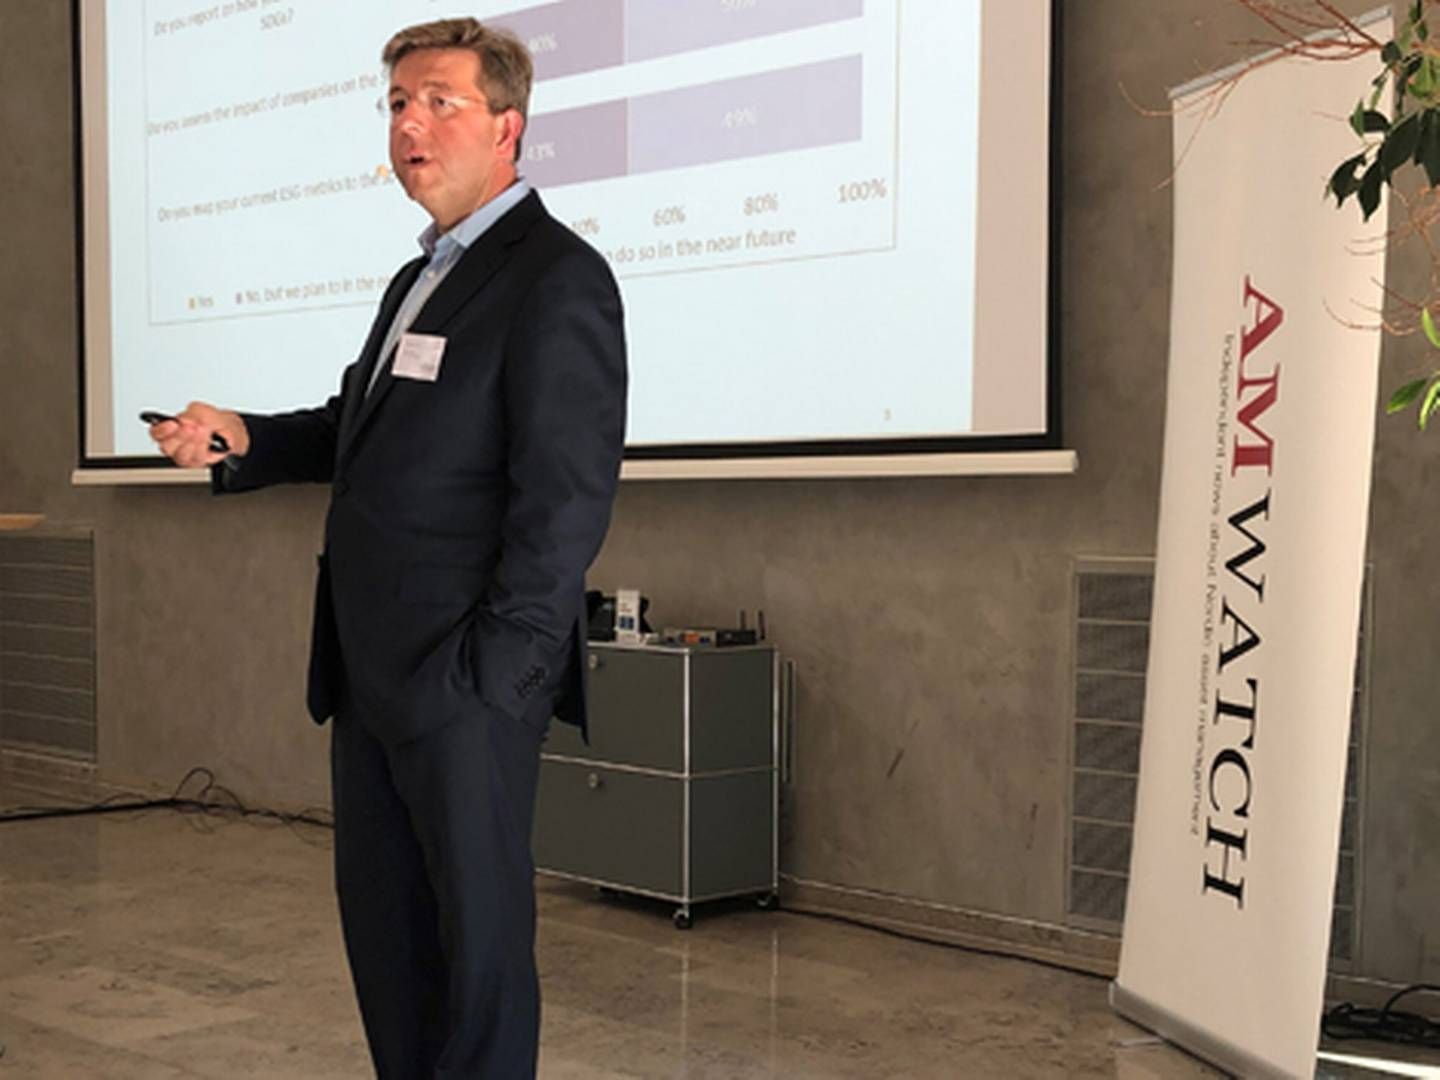 Tycho Sneyer presenting at Nordic Investment Forum. | Photo: Søren Rathlou Top / AMWatch